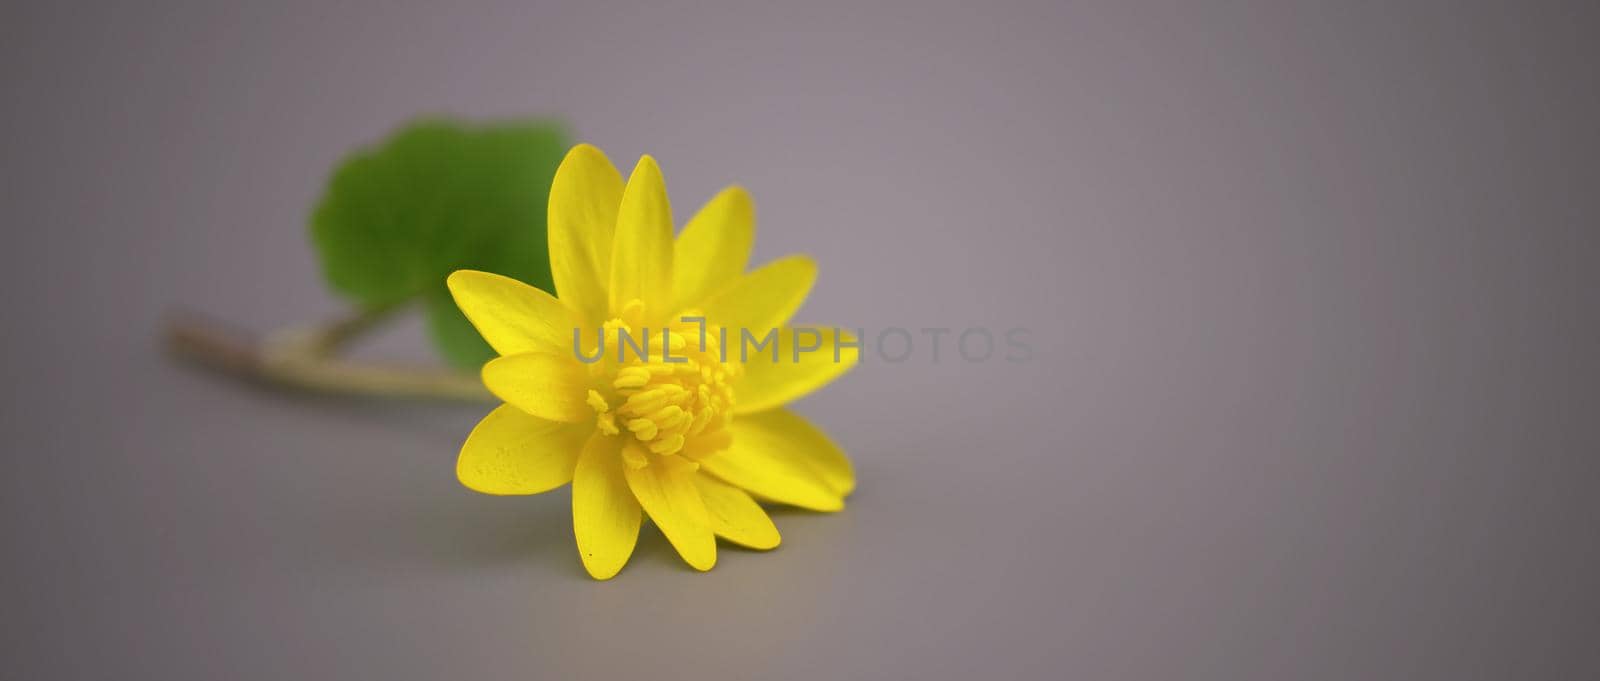 Yellow spring flower on gray background by NetPix